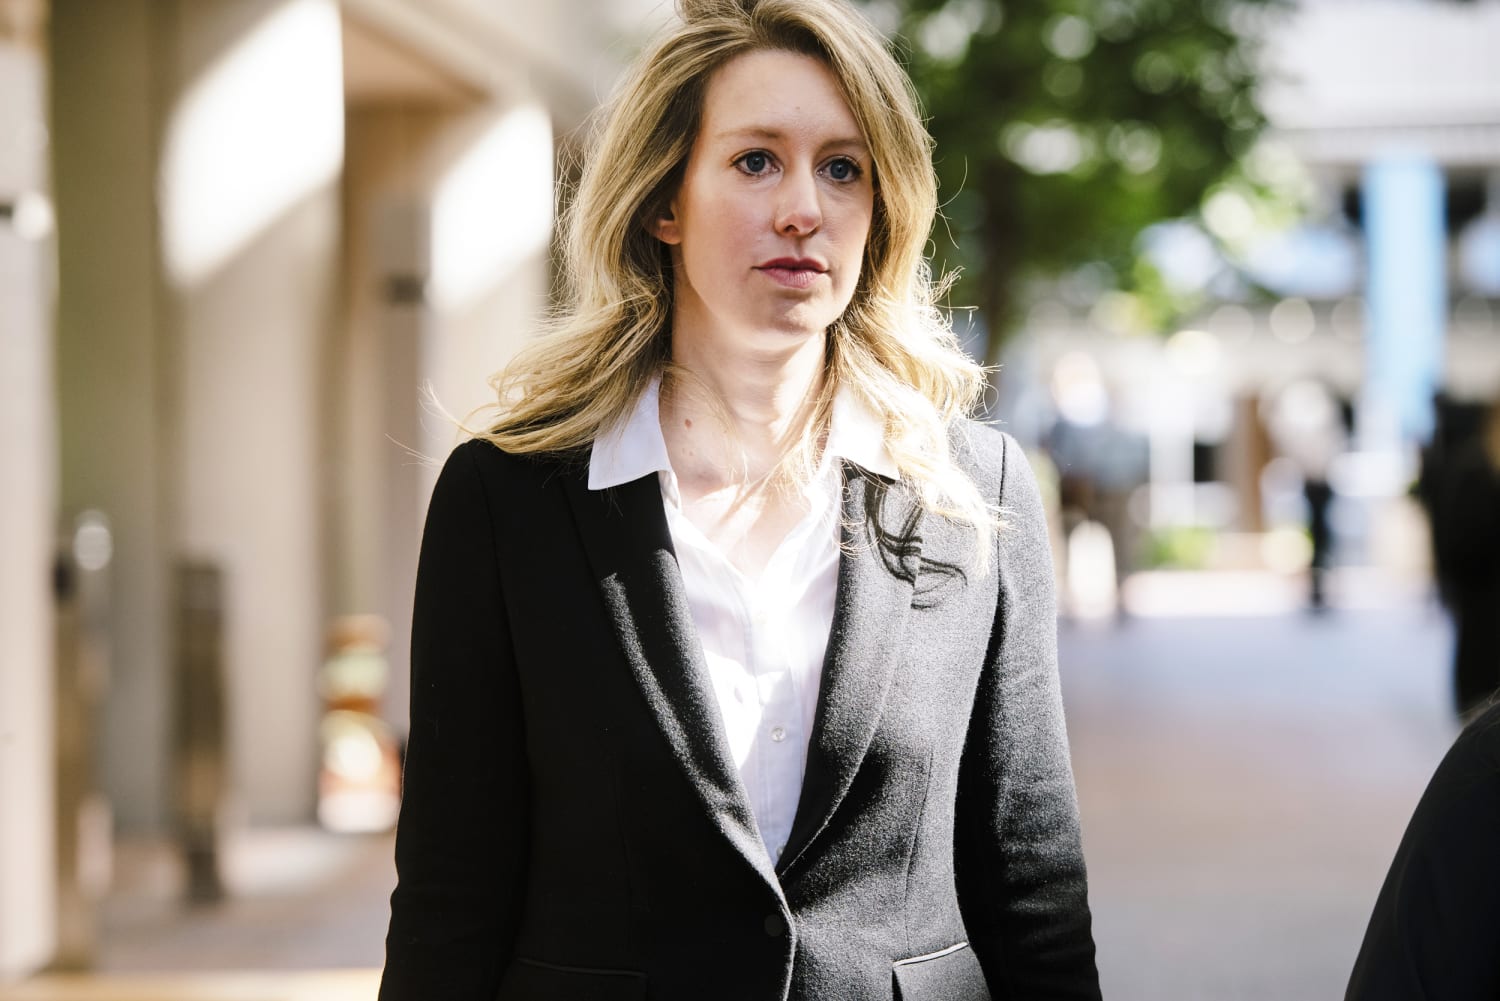 Theranos founder Elizabeth Holmes still had a one-way ticket to Mexico after she was convicted of fraud